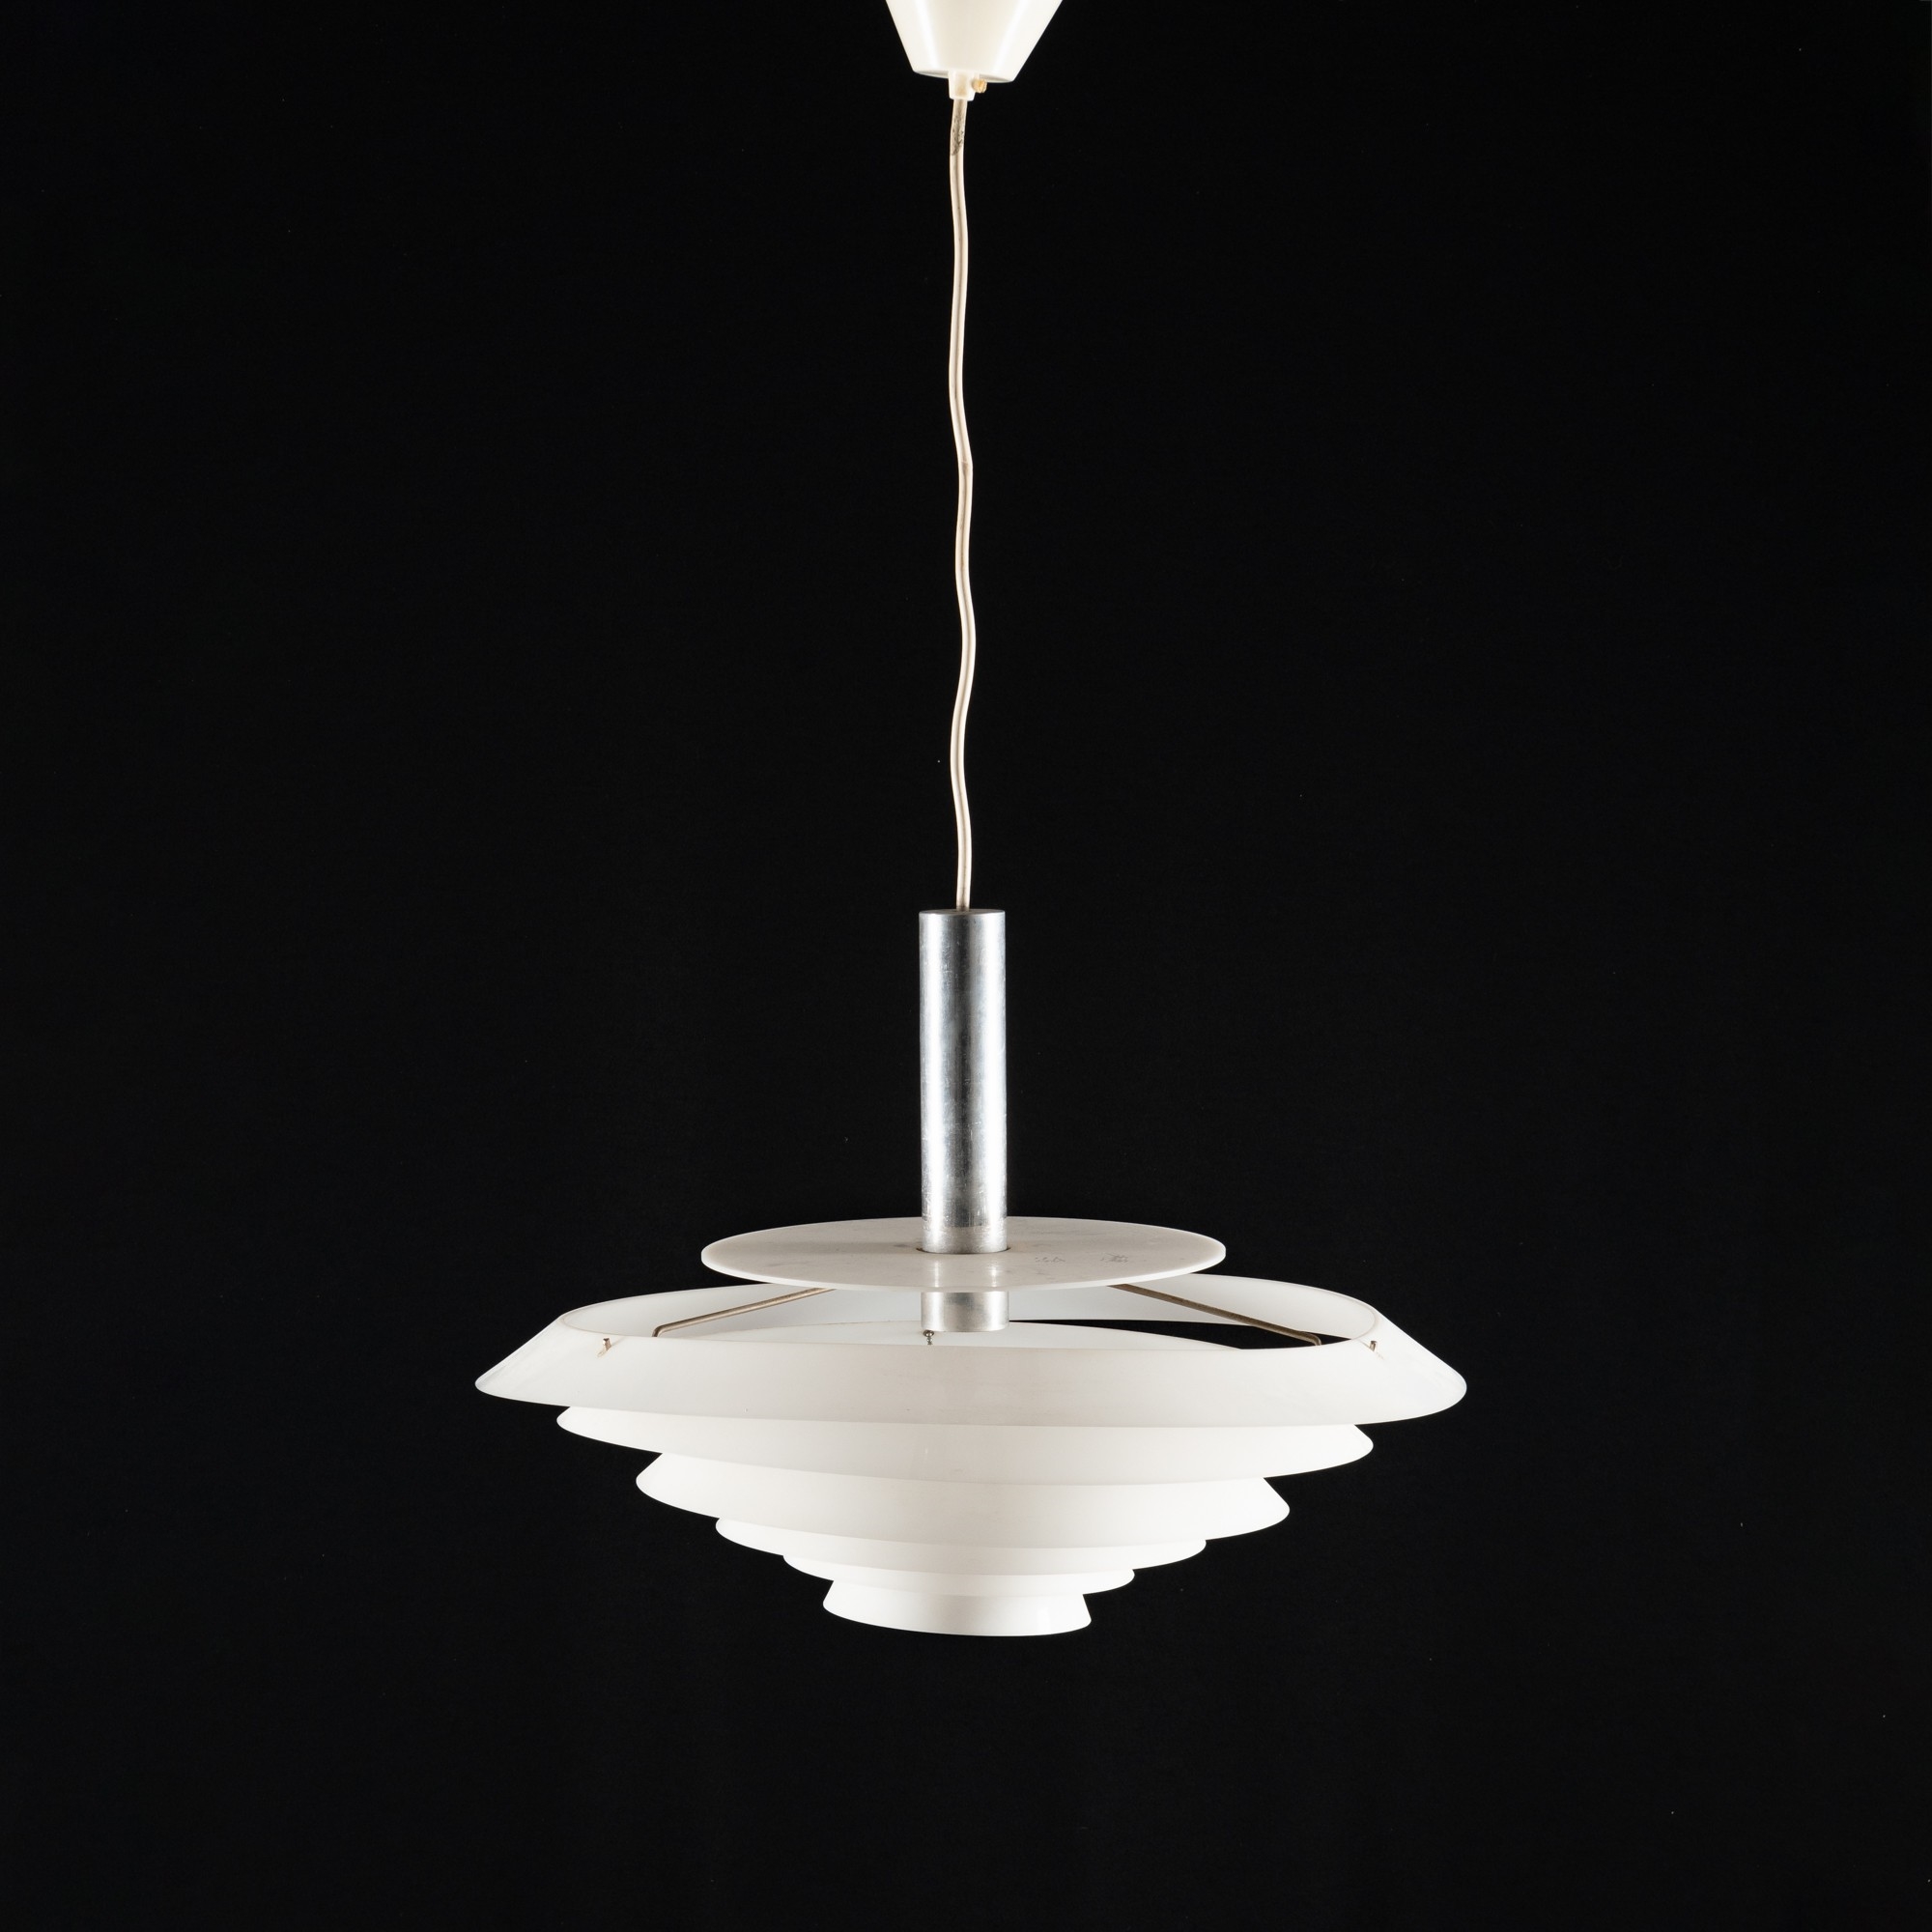 Artwork by Yki Nummi, Ceiling light, Lameet, Made of acrylic and metal